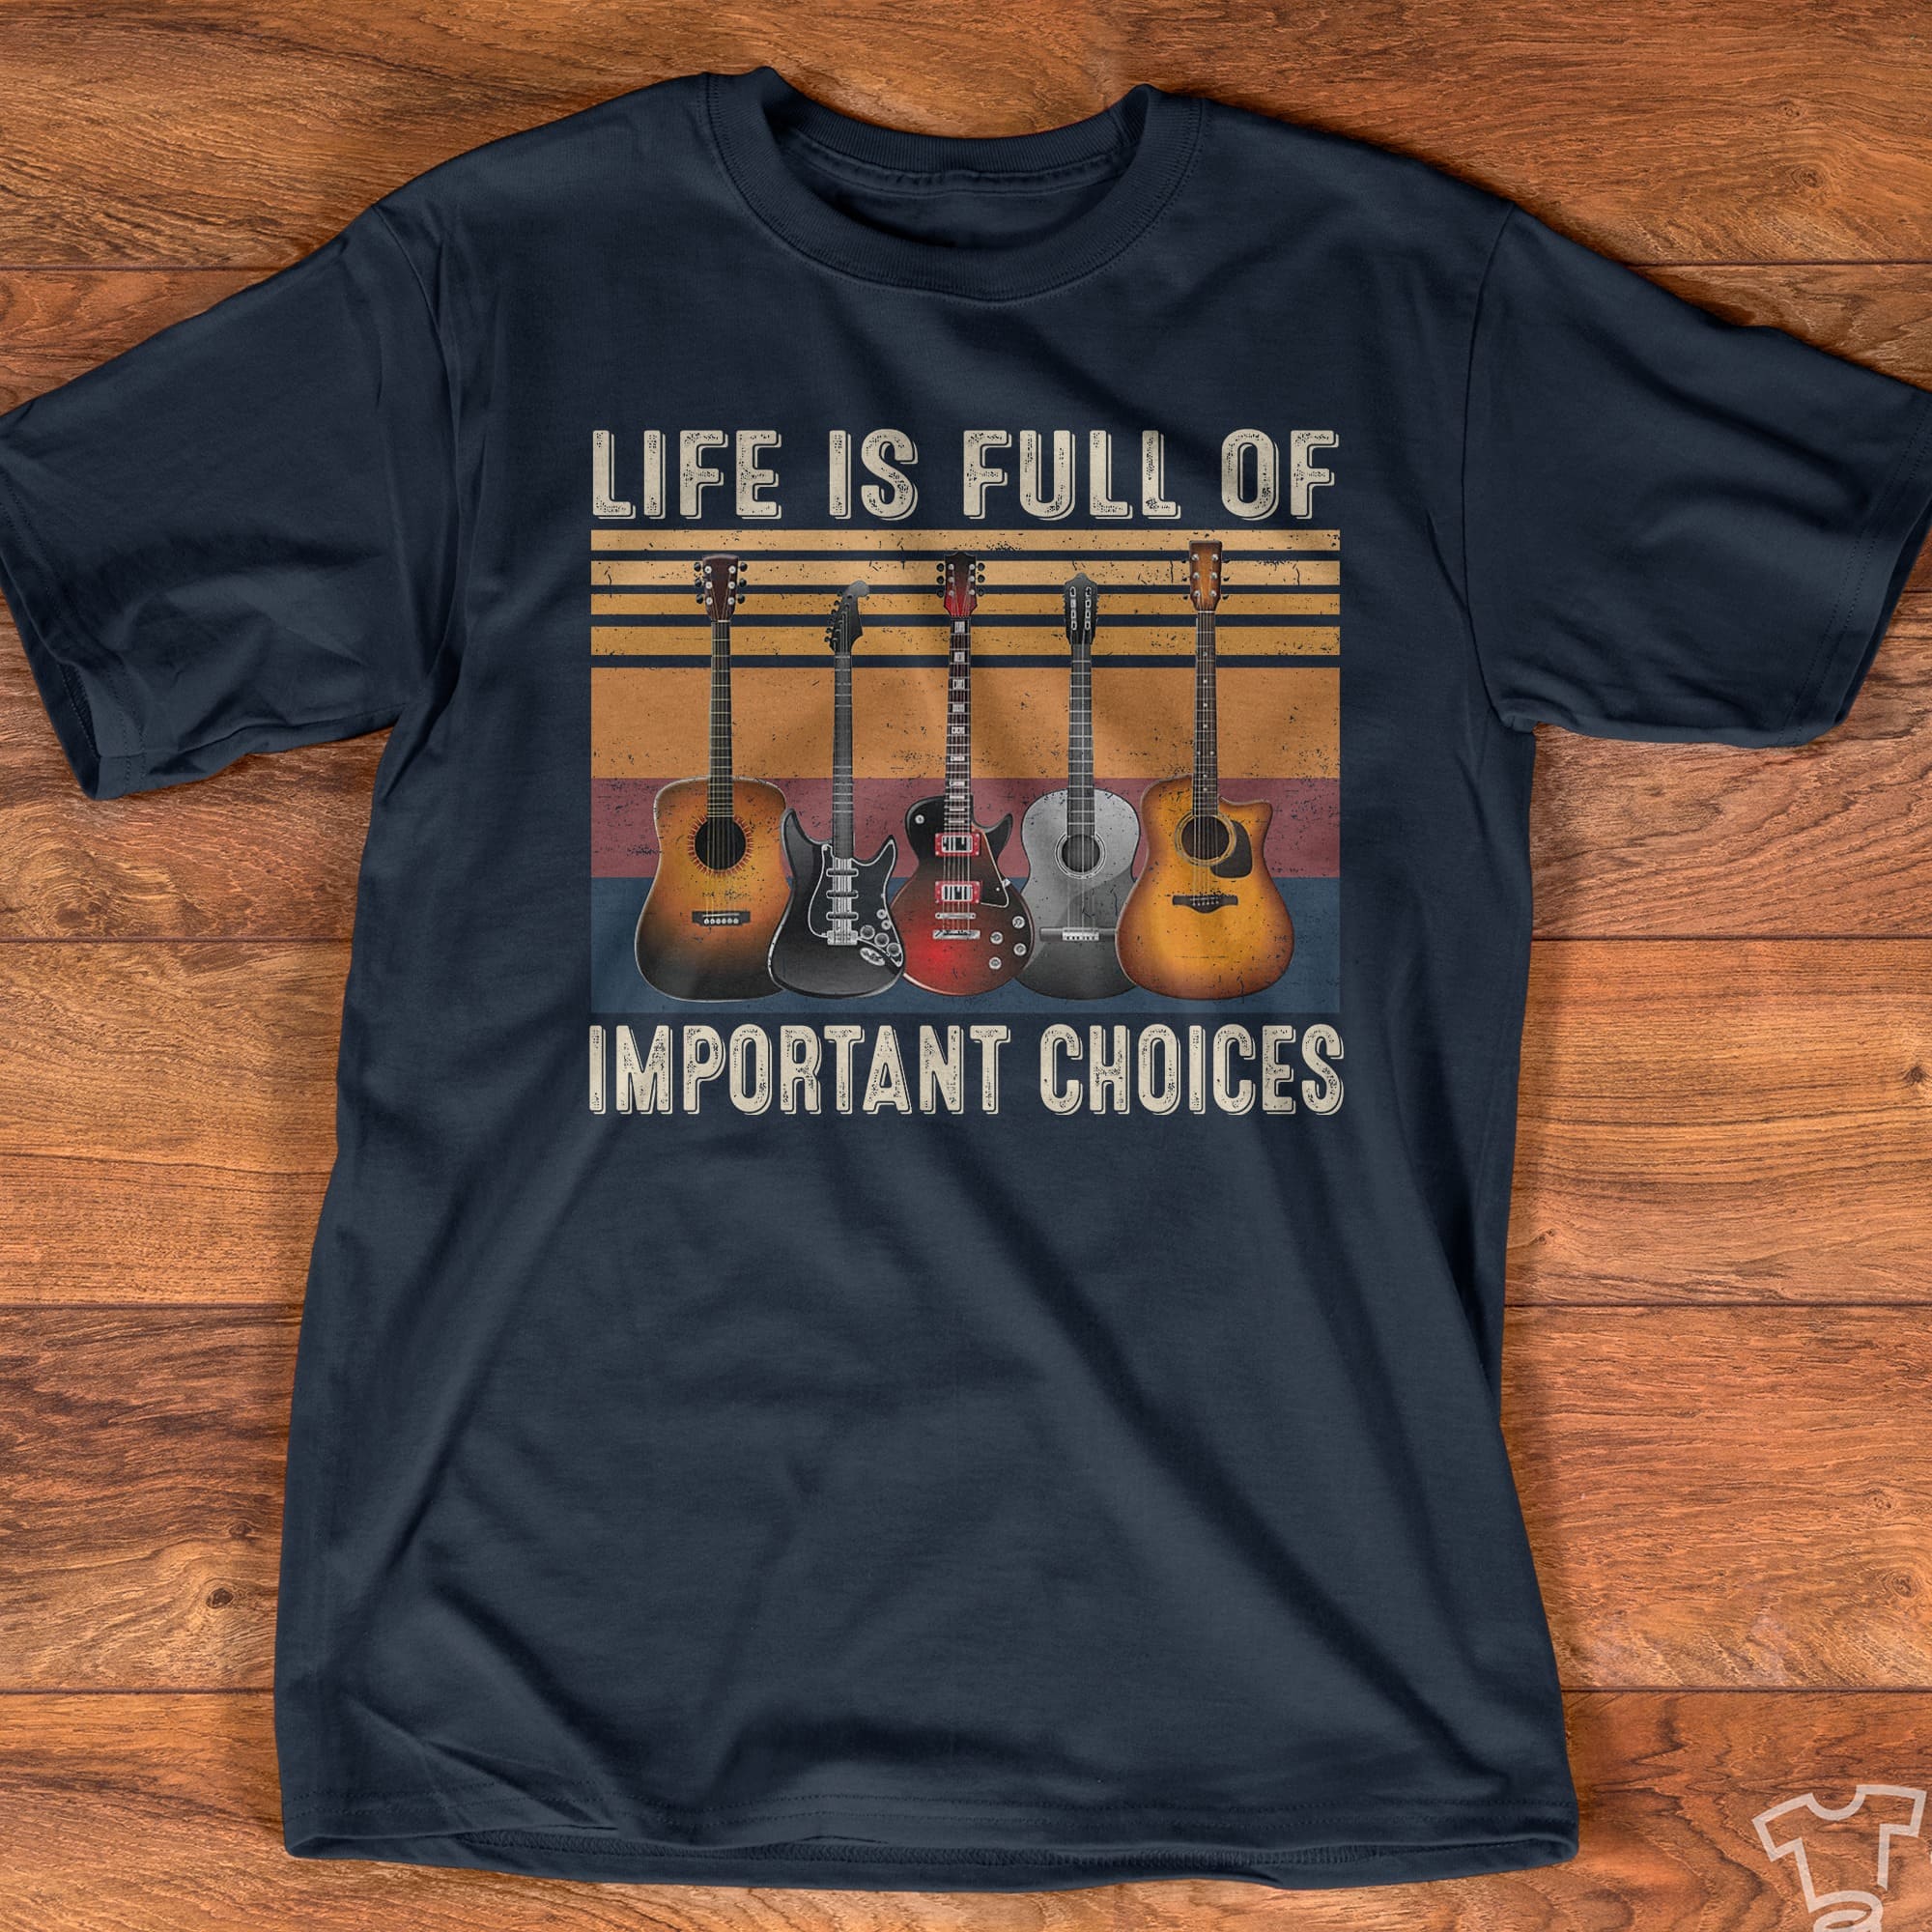 Life is full of important choices - Gift for guitarist, guitar collection graphic T-shirt